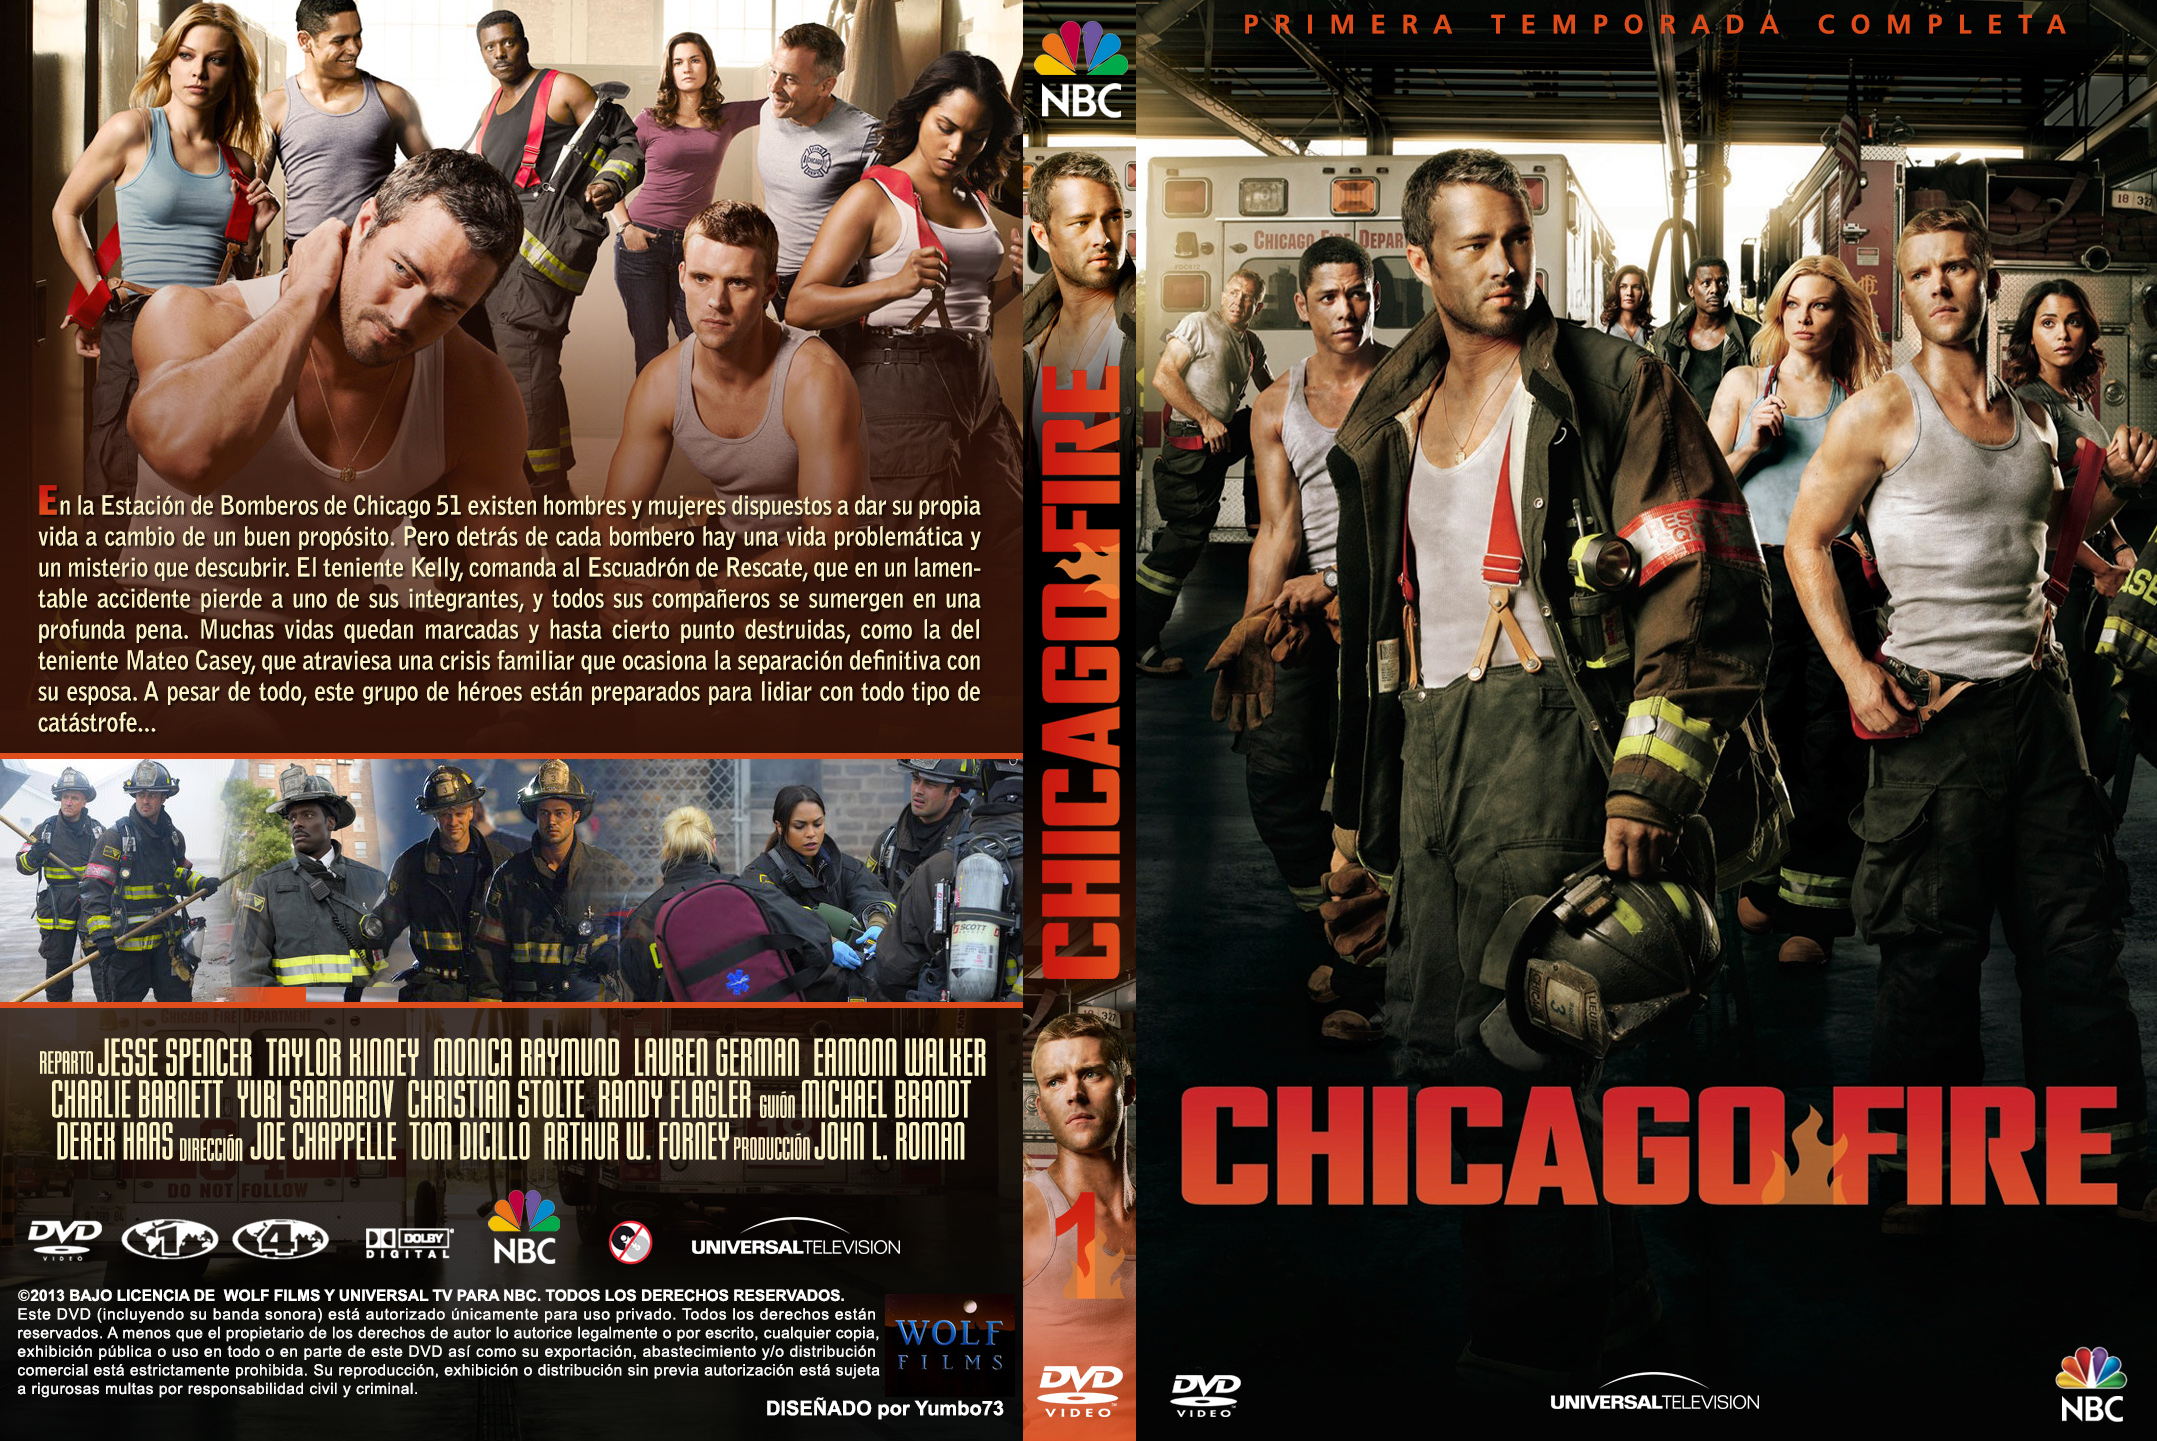 Chicago Fire Serie Image Thecelebritypix